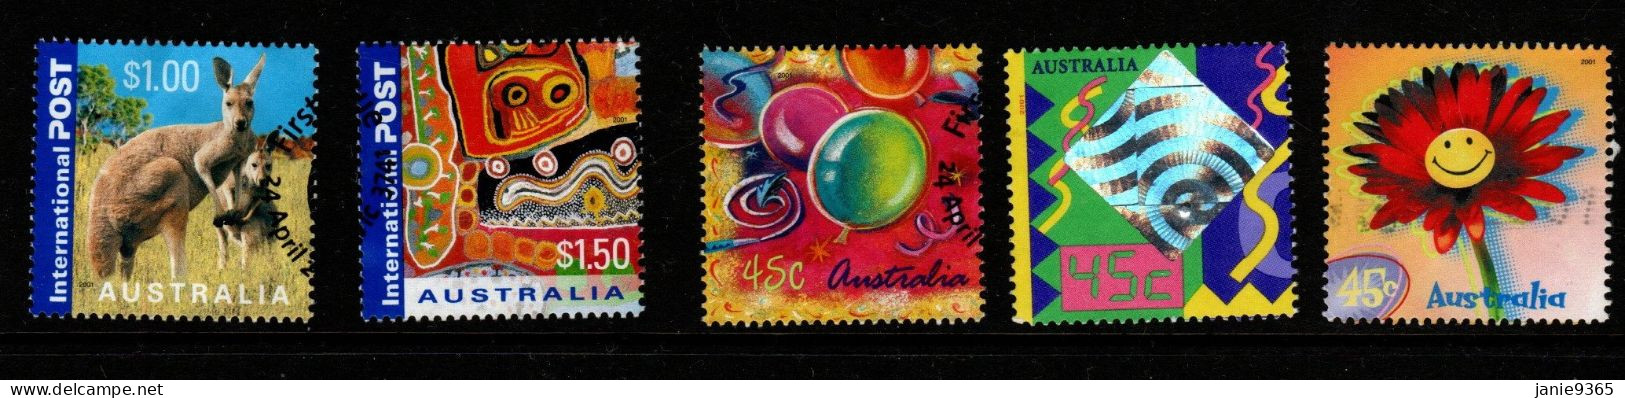 Australia ASC 1914-18 2001 Colour My Day ,Used - Used Stamps